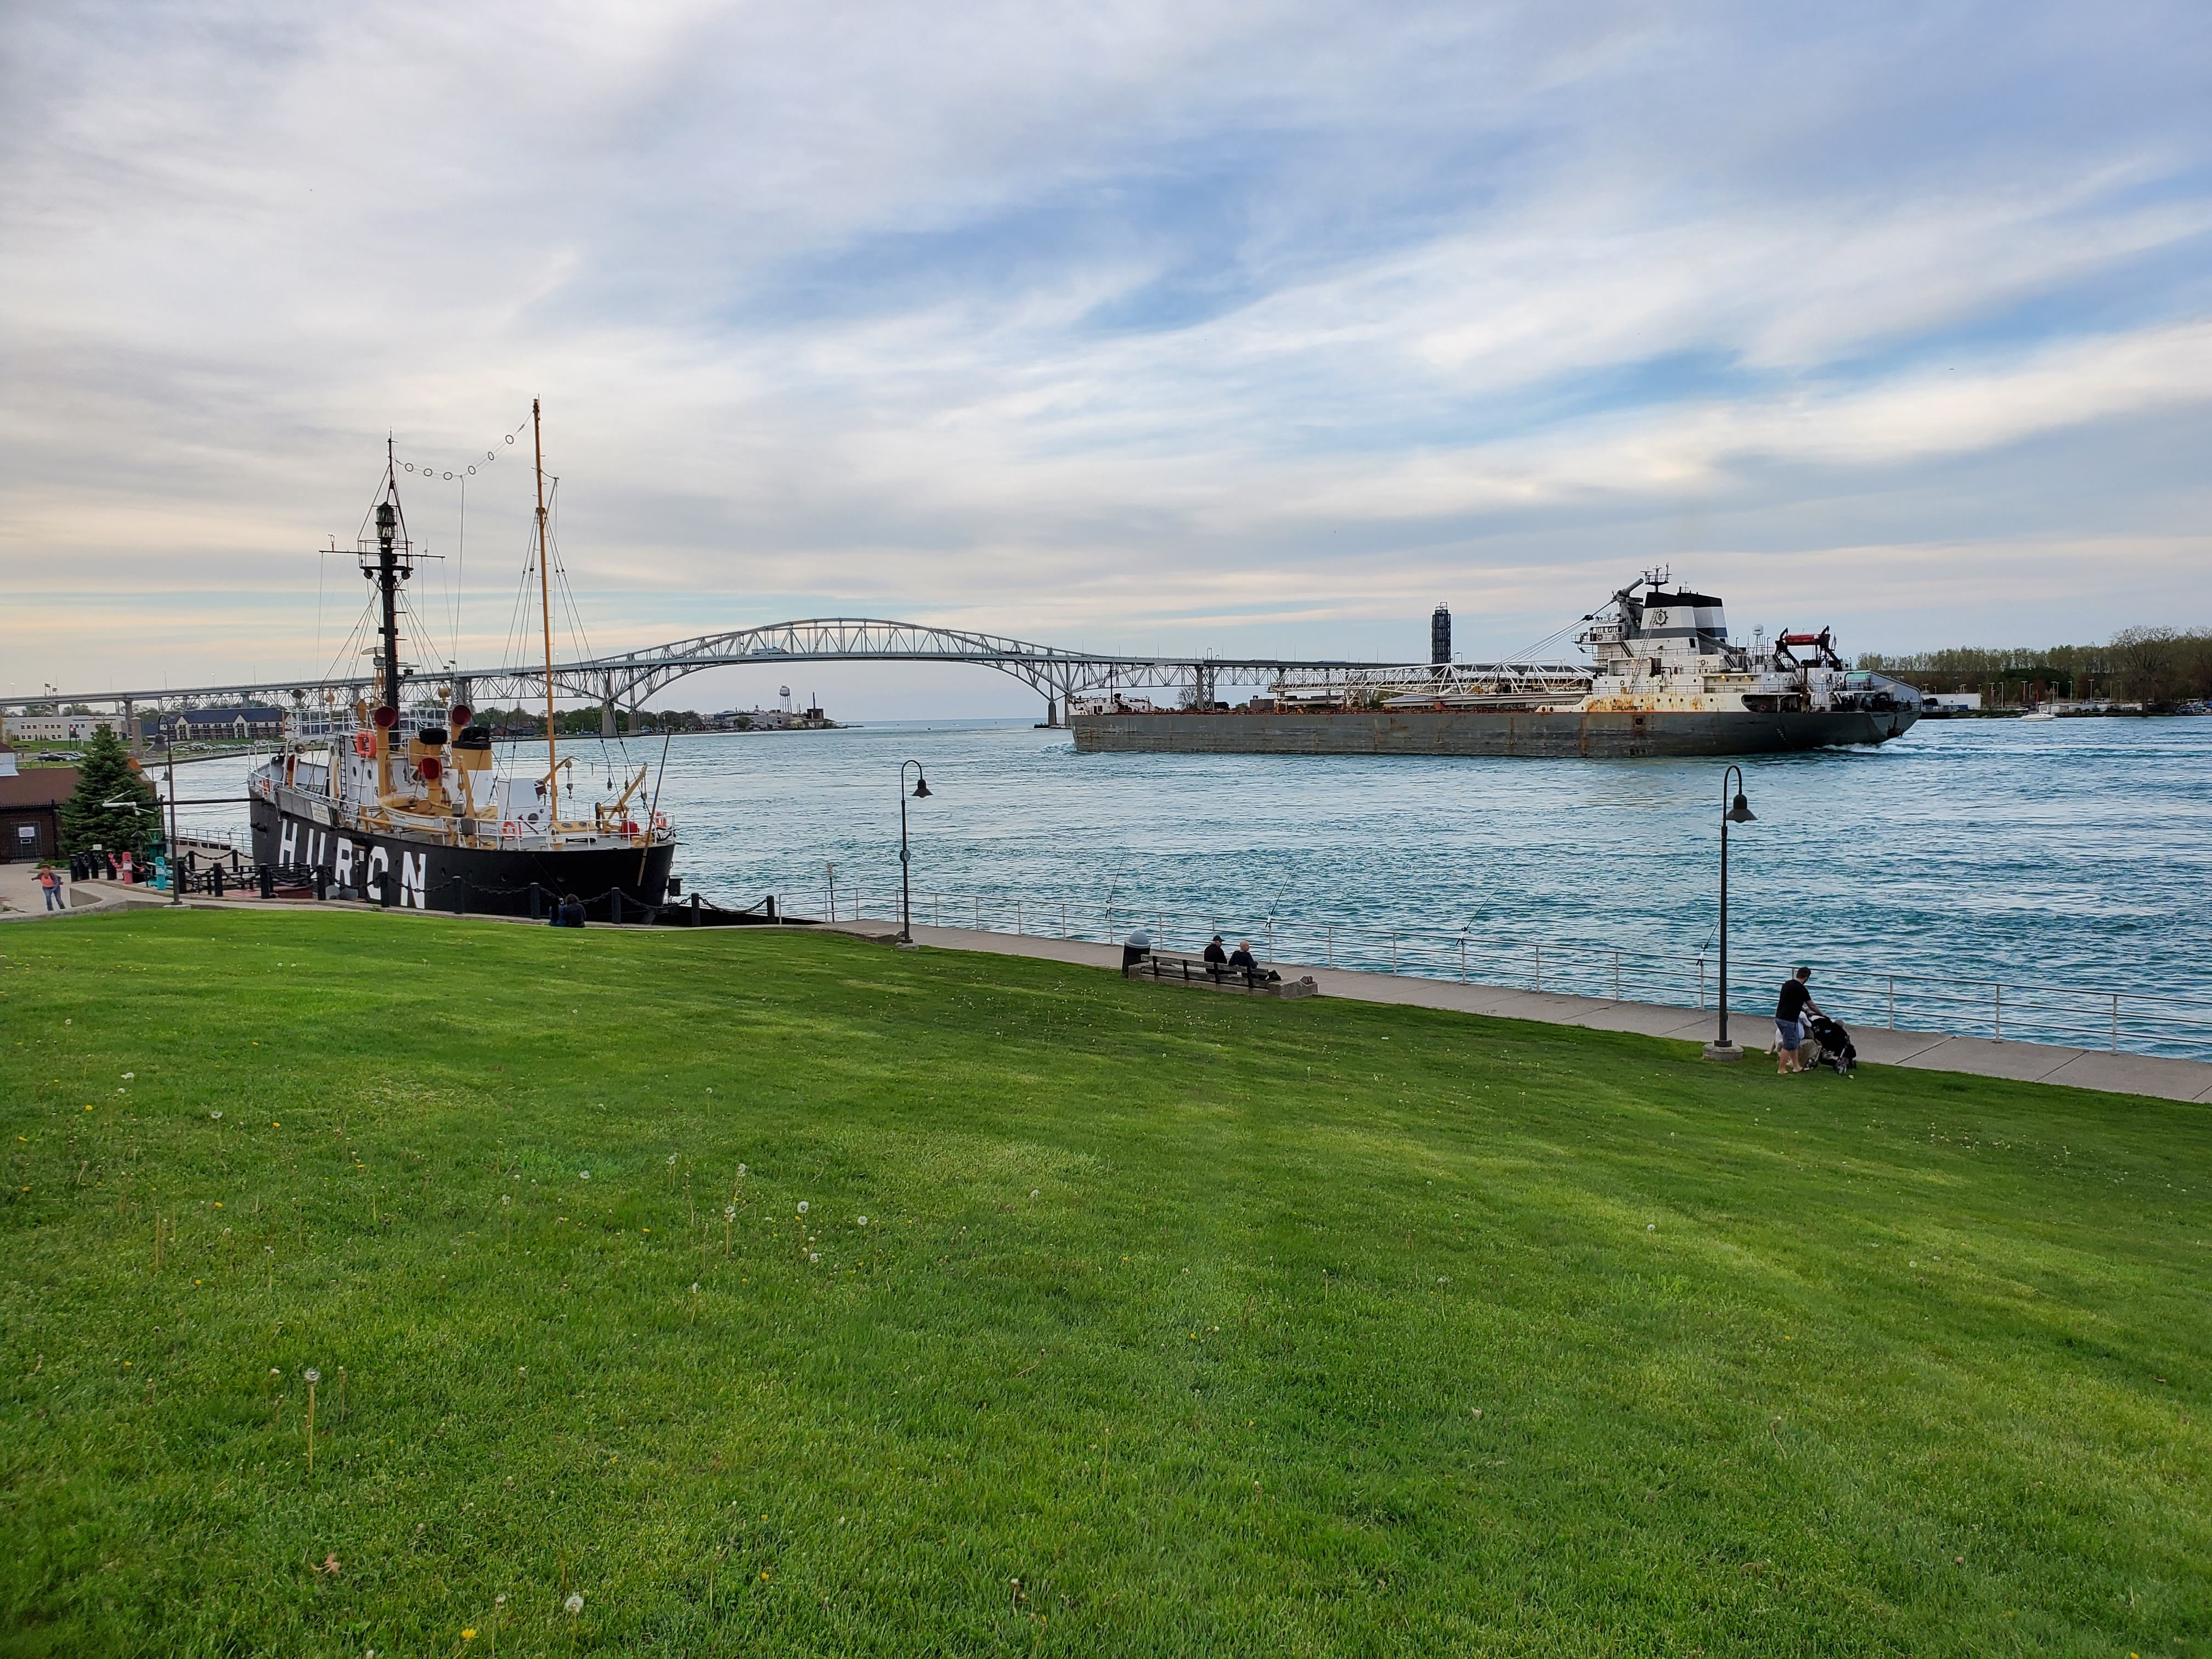 Lightship HURON and passing freighter, Port Huron, May